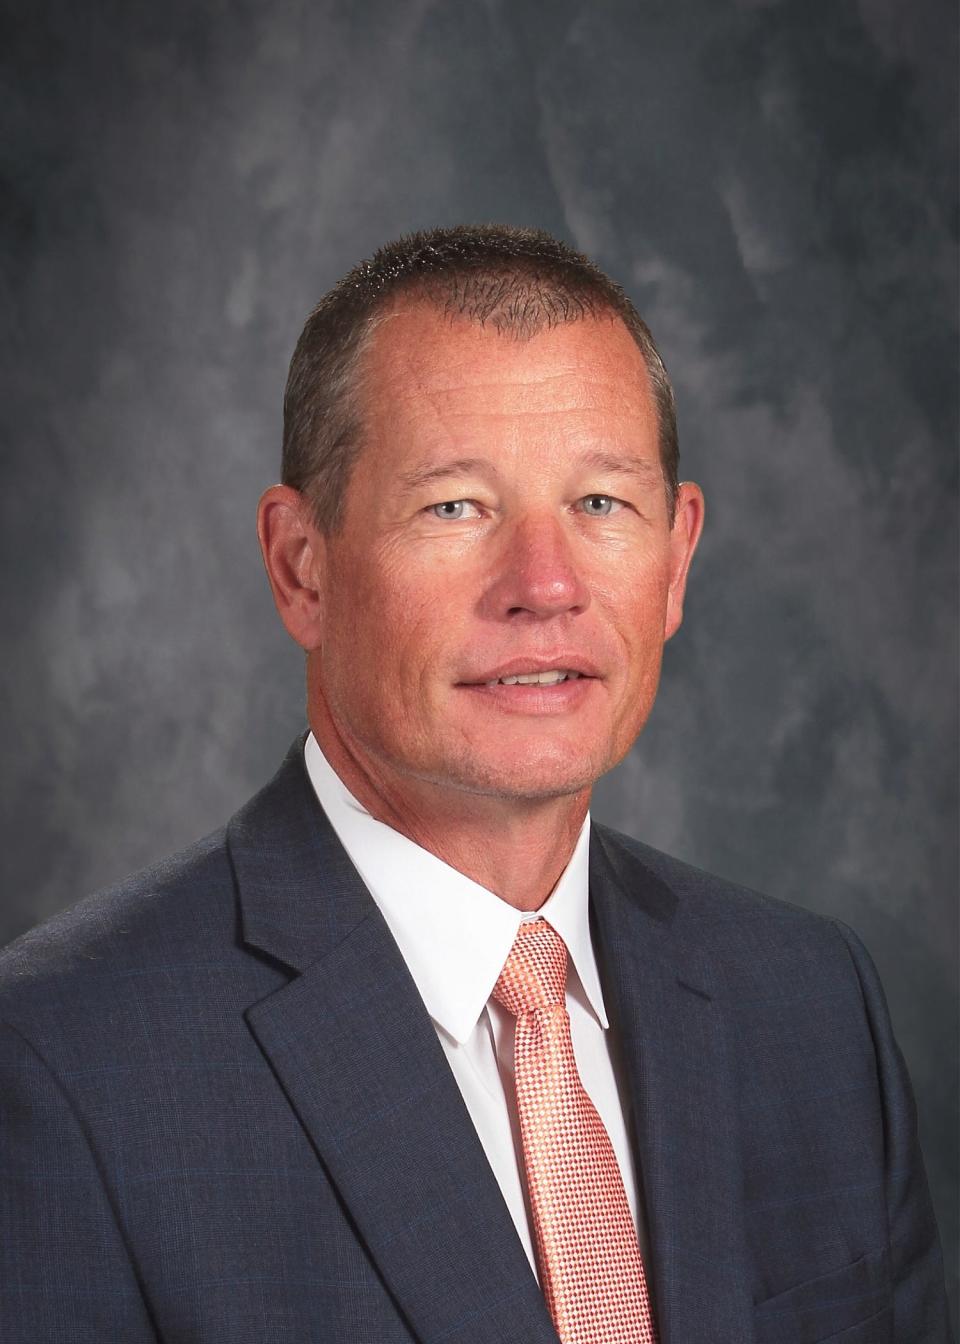 Patrick Spray has been chosen as Perry Township school district's next superintendent and will take up the position at the end of the 2022-2023 school year.